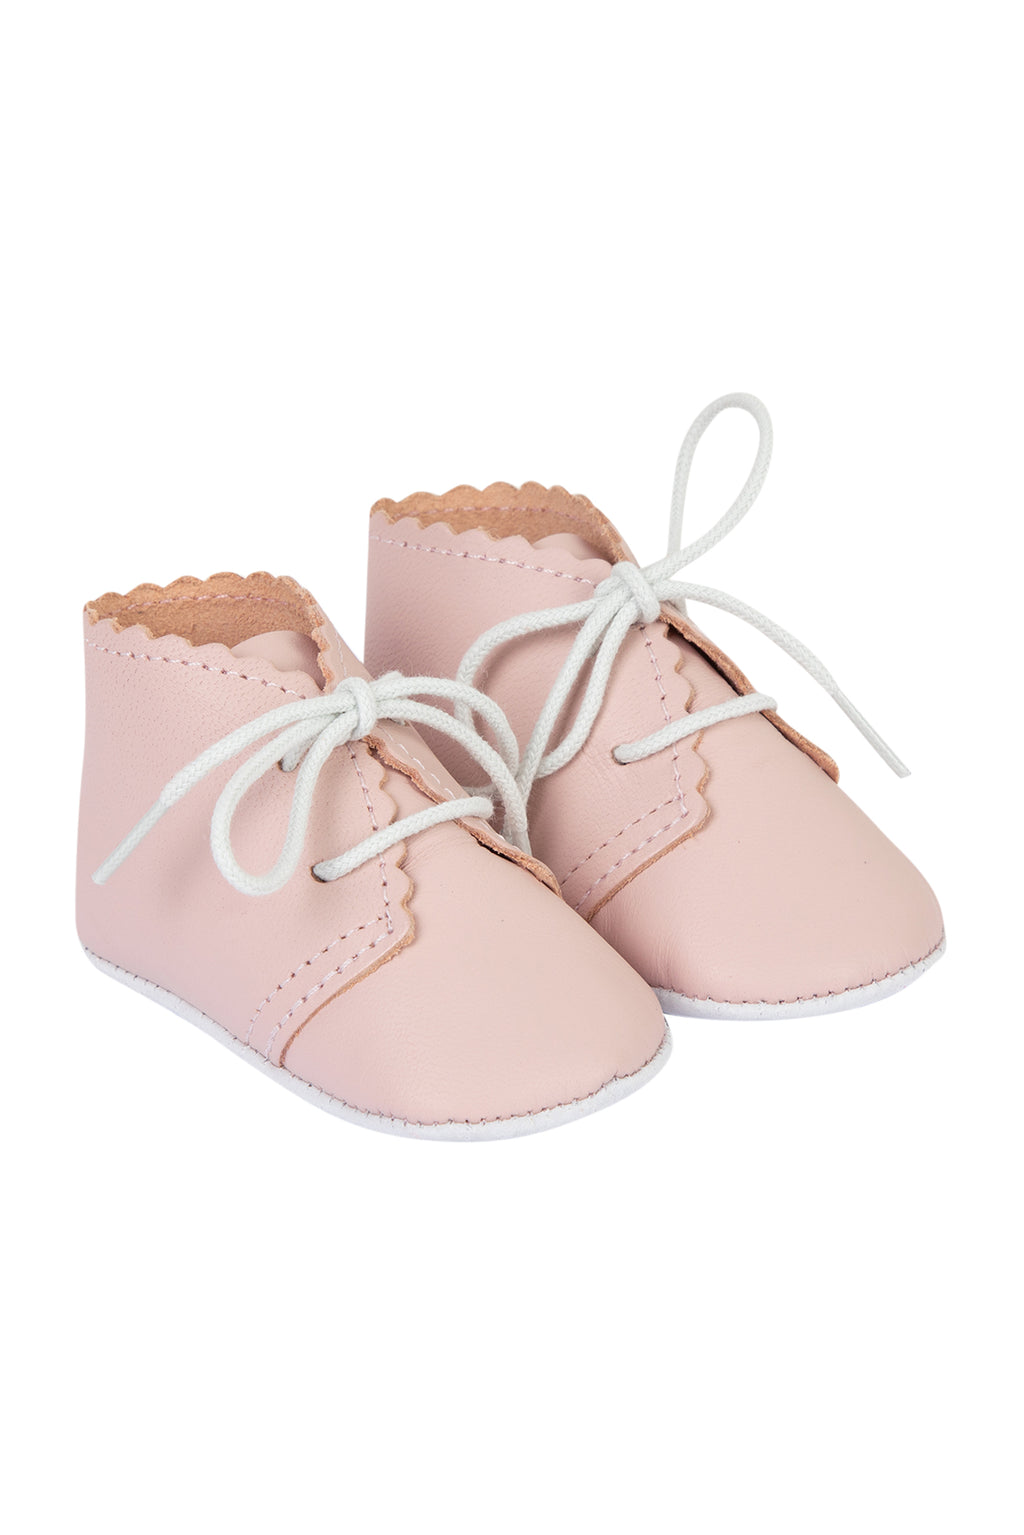 Slippers - Peach patent leather